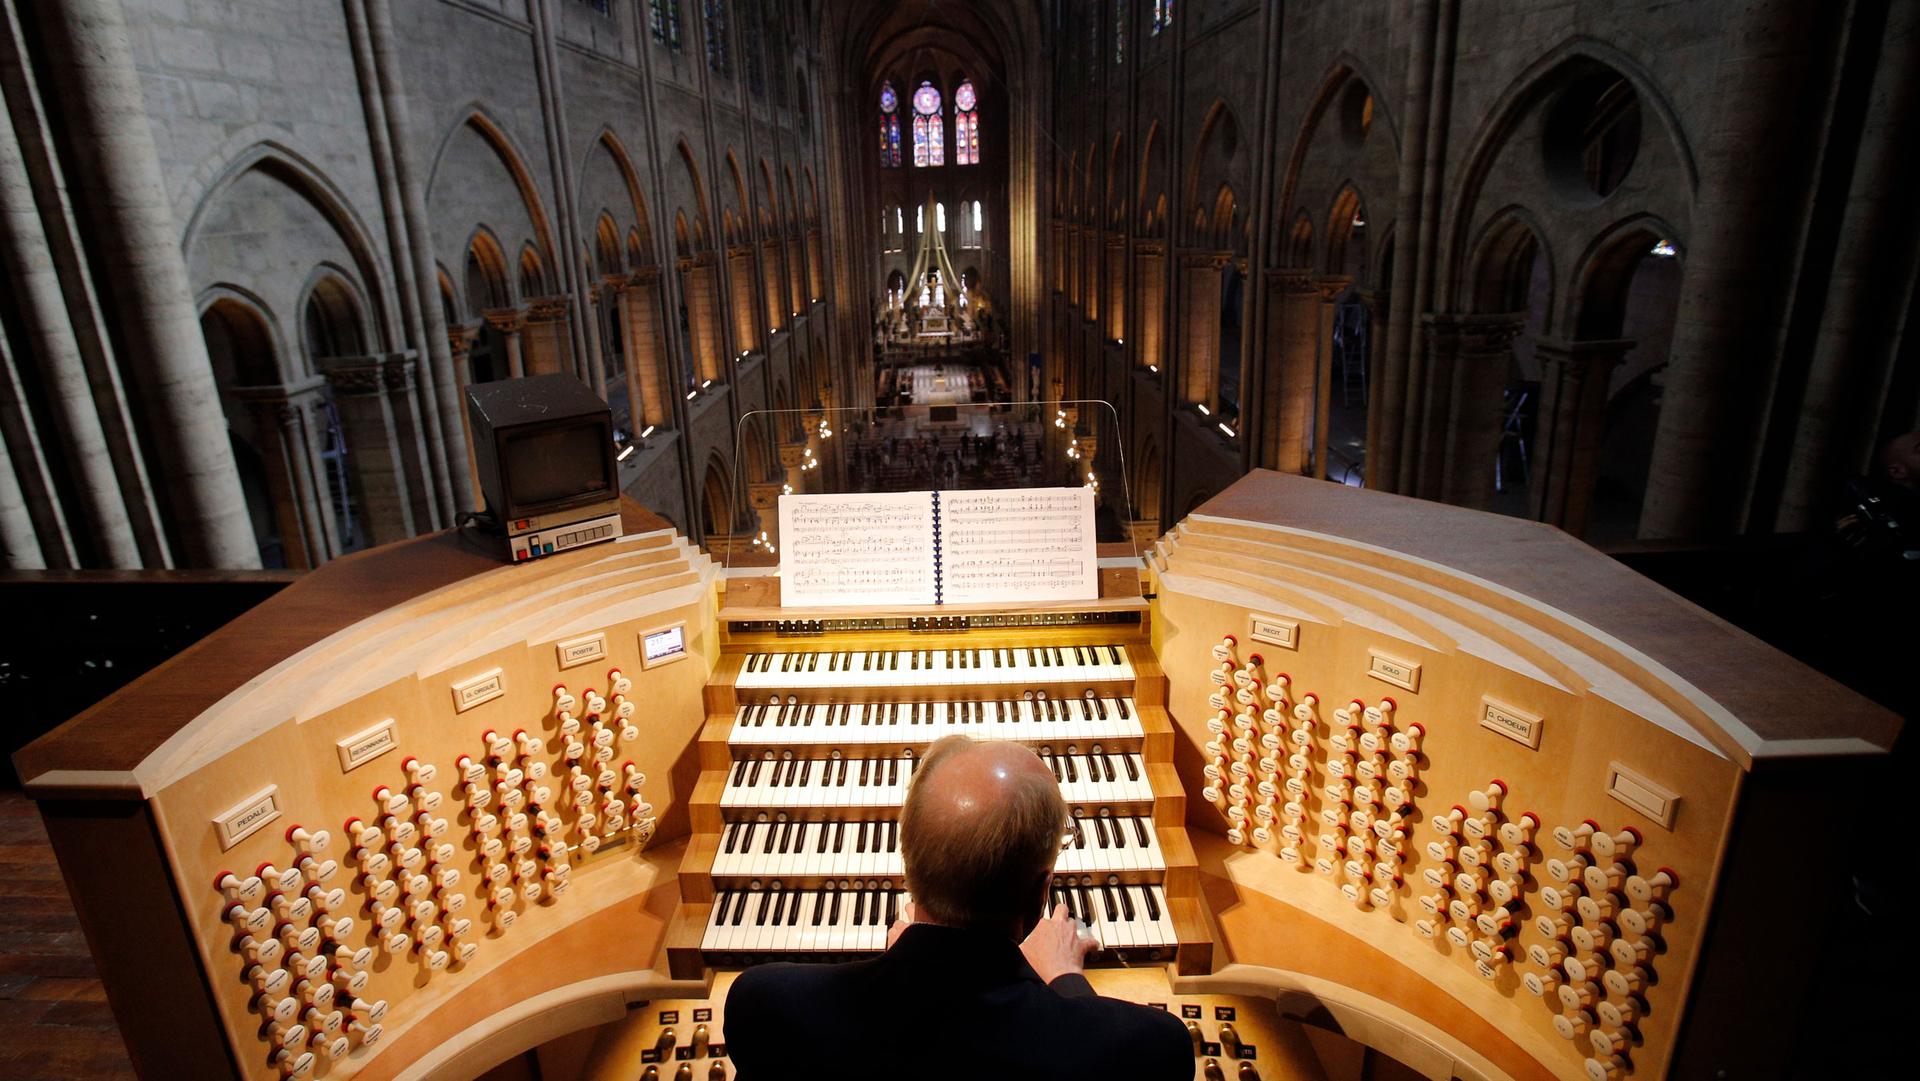 A man is shown from behind sitting at Notre Dame's organ with five rows of keys.